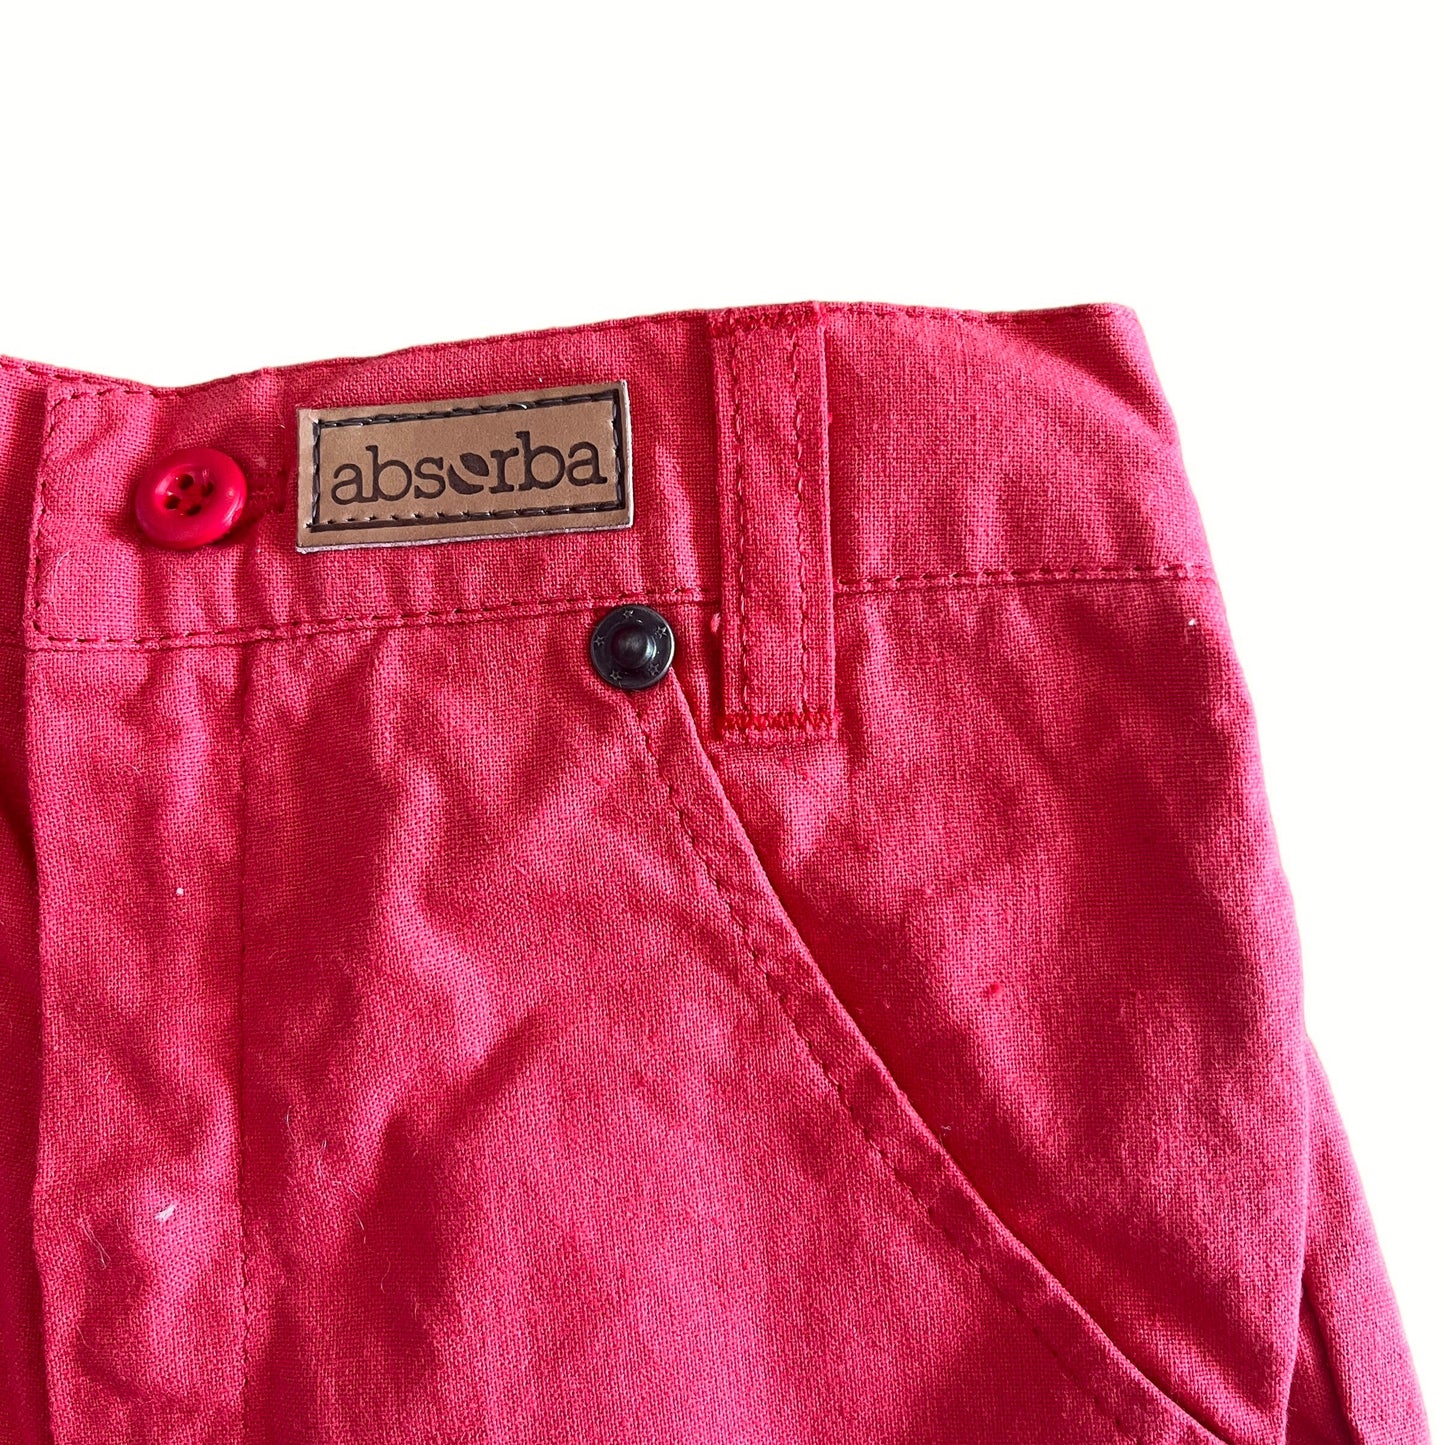 1970's Red Shorts / 9-12M